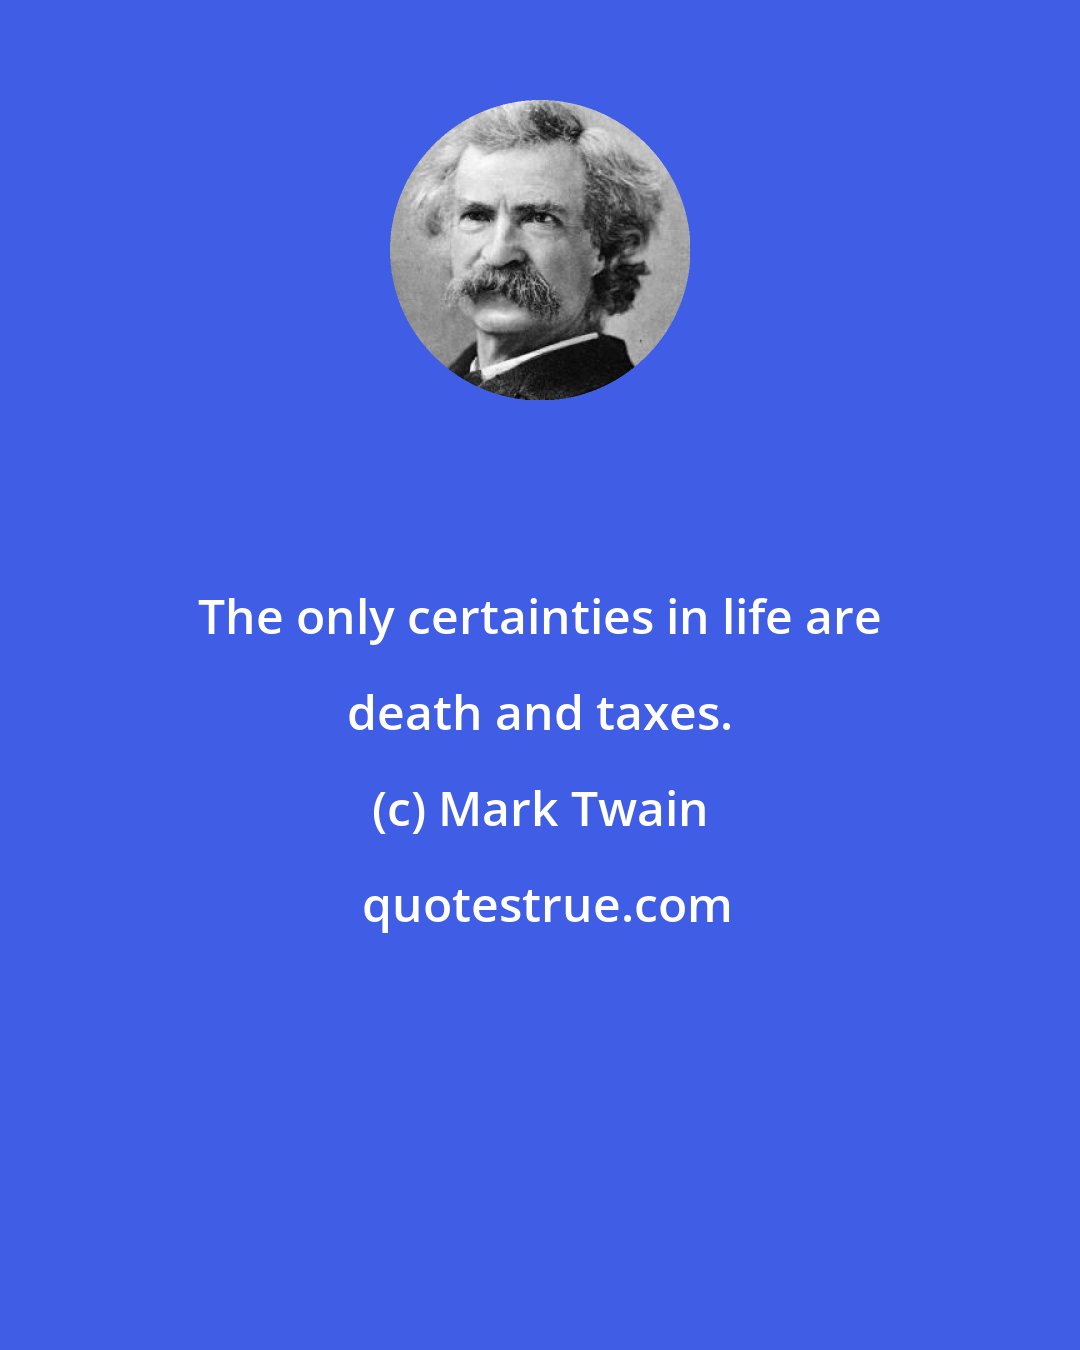 Mark Twain: The only certainties in life are death and taxes.